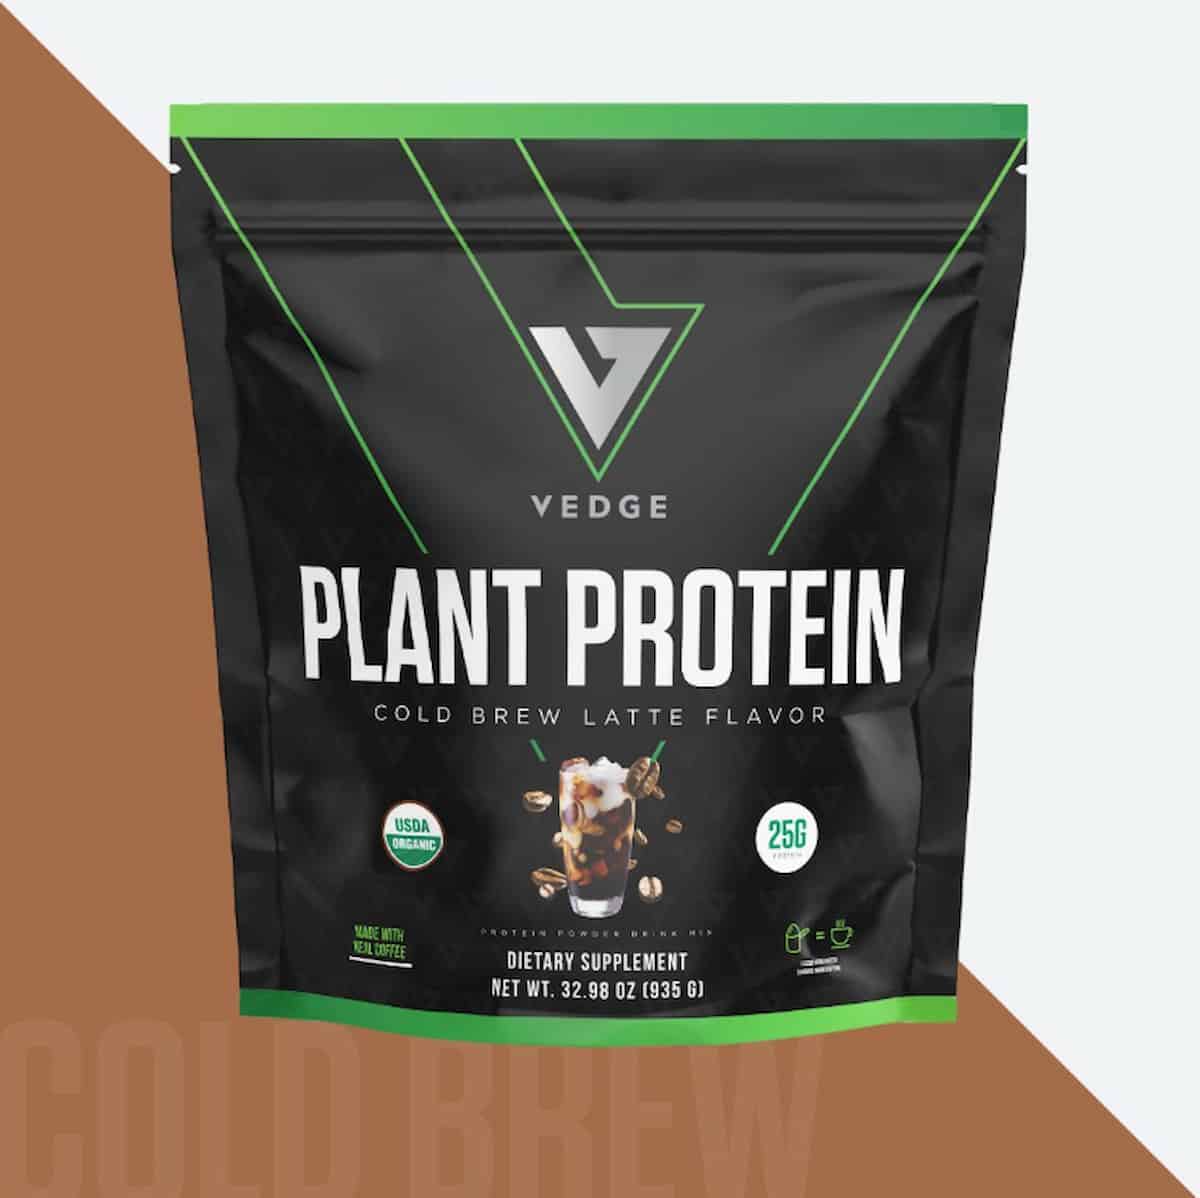 A package of Vedge Nutrition's plant protein cold brew latte flavor.